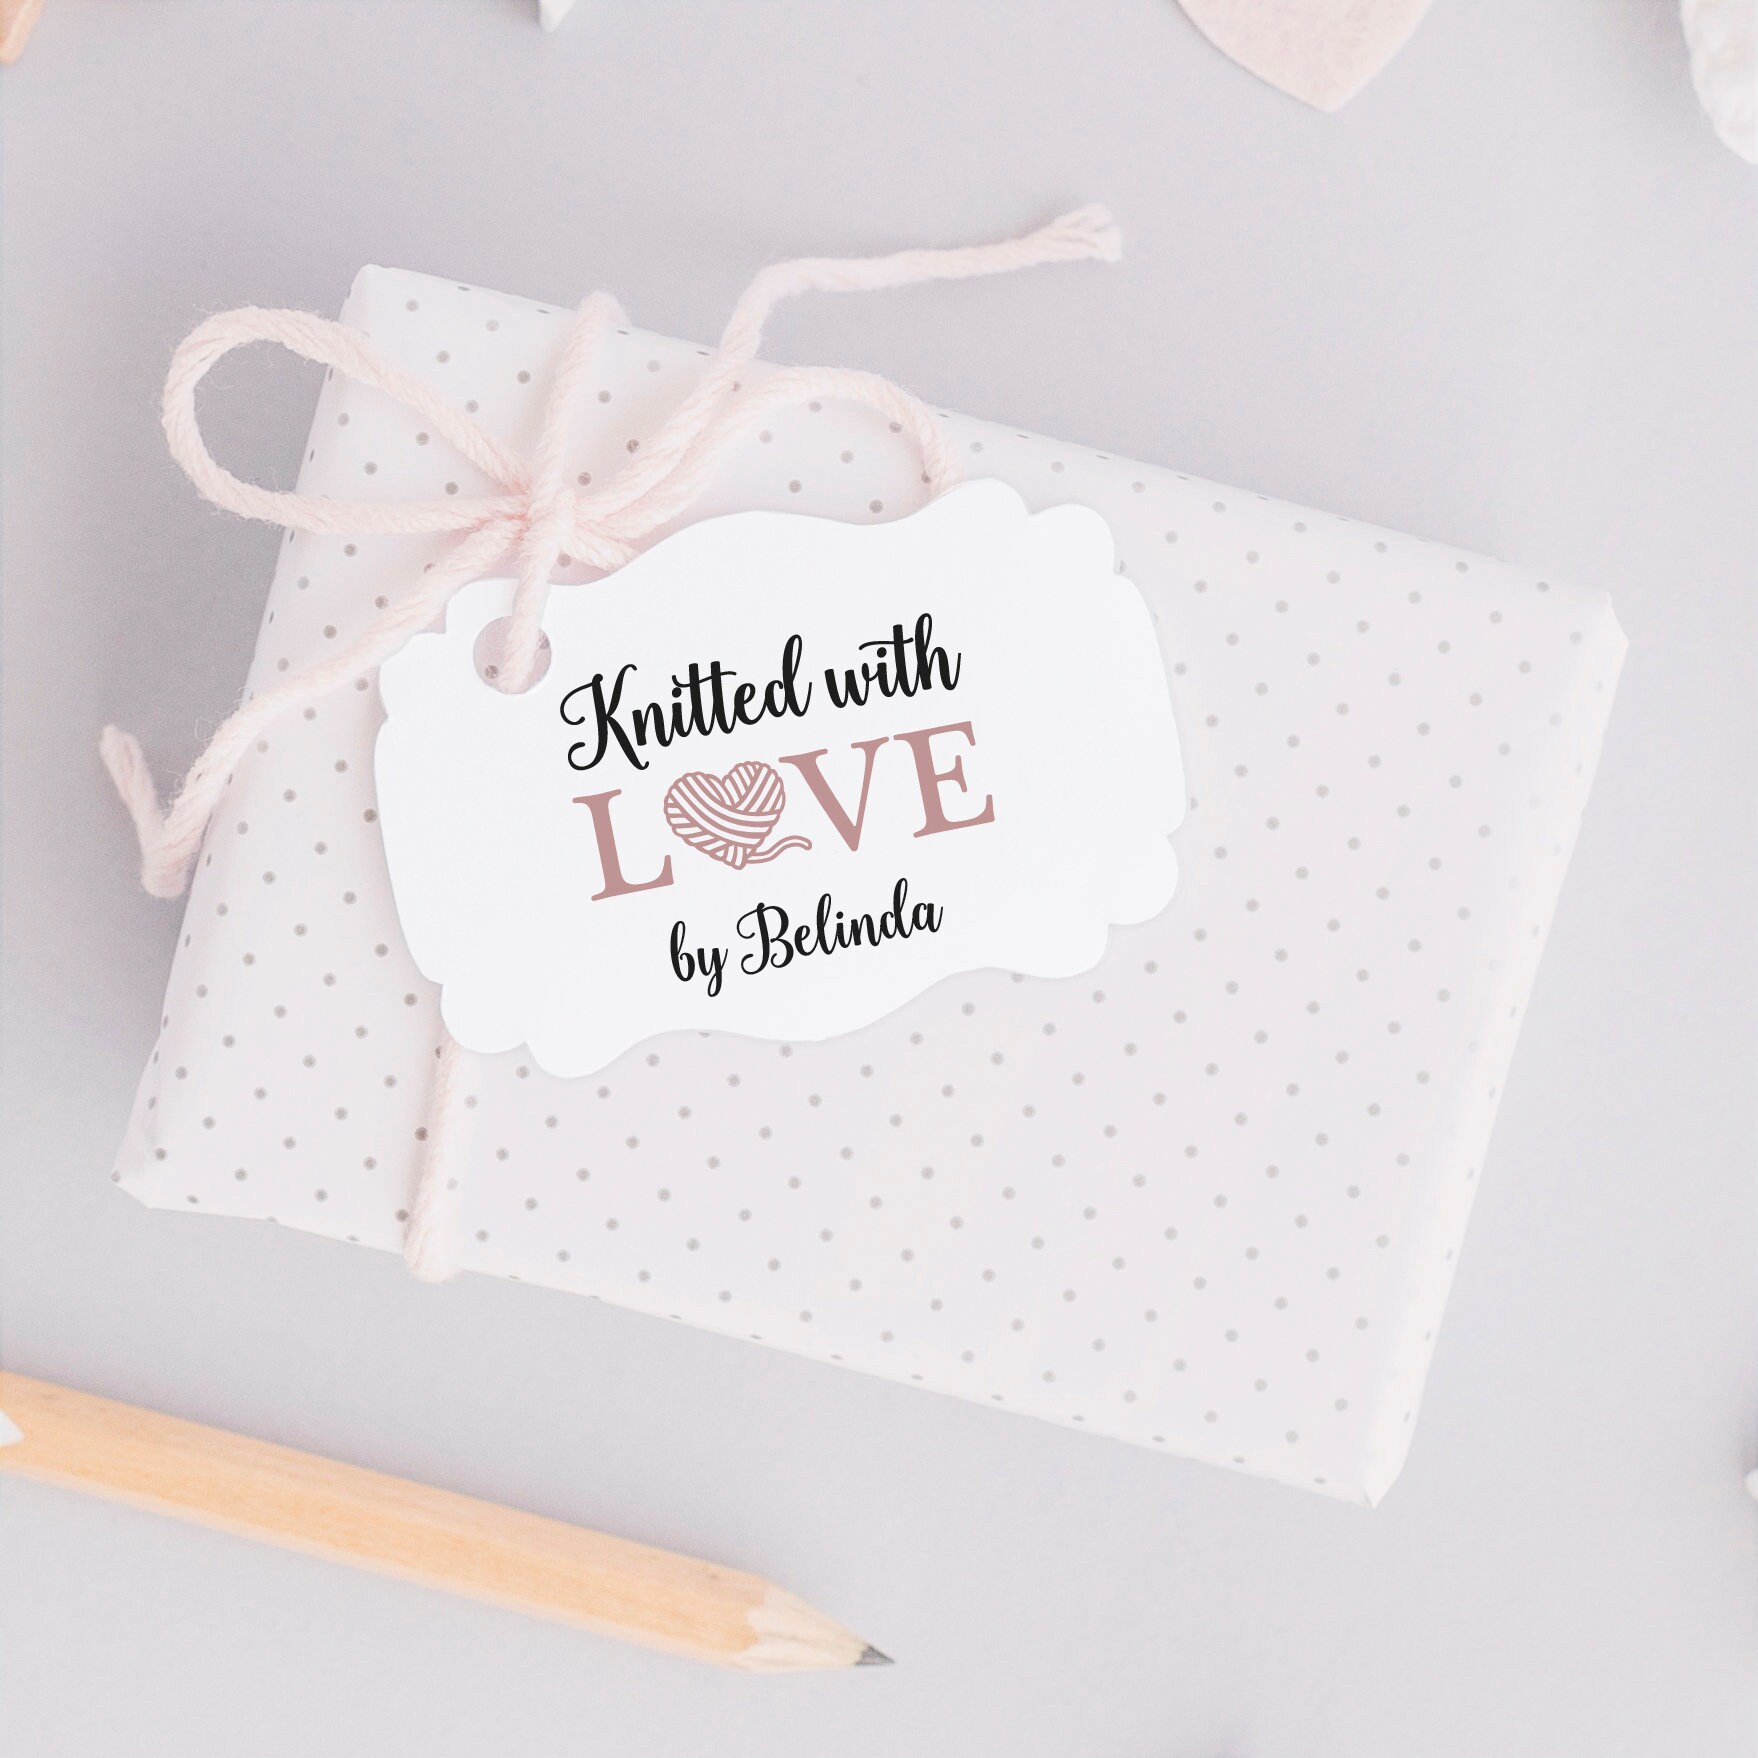 Printable Handmade With Love Gift Tag Template, Personalized Hand